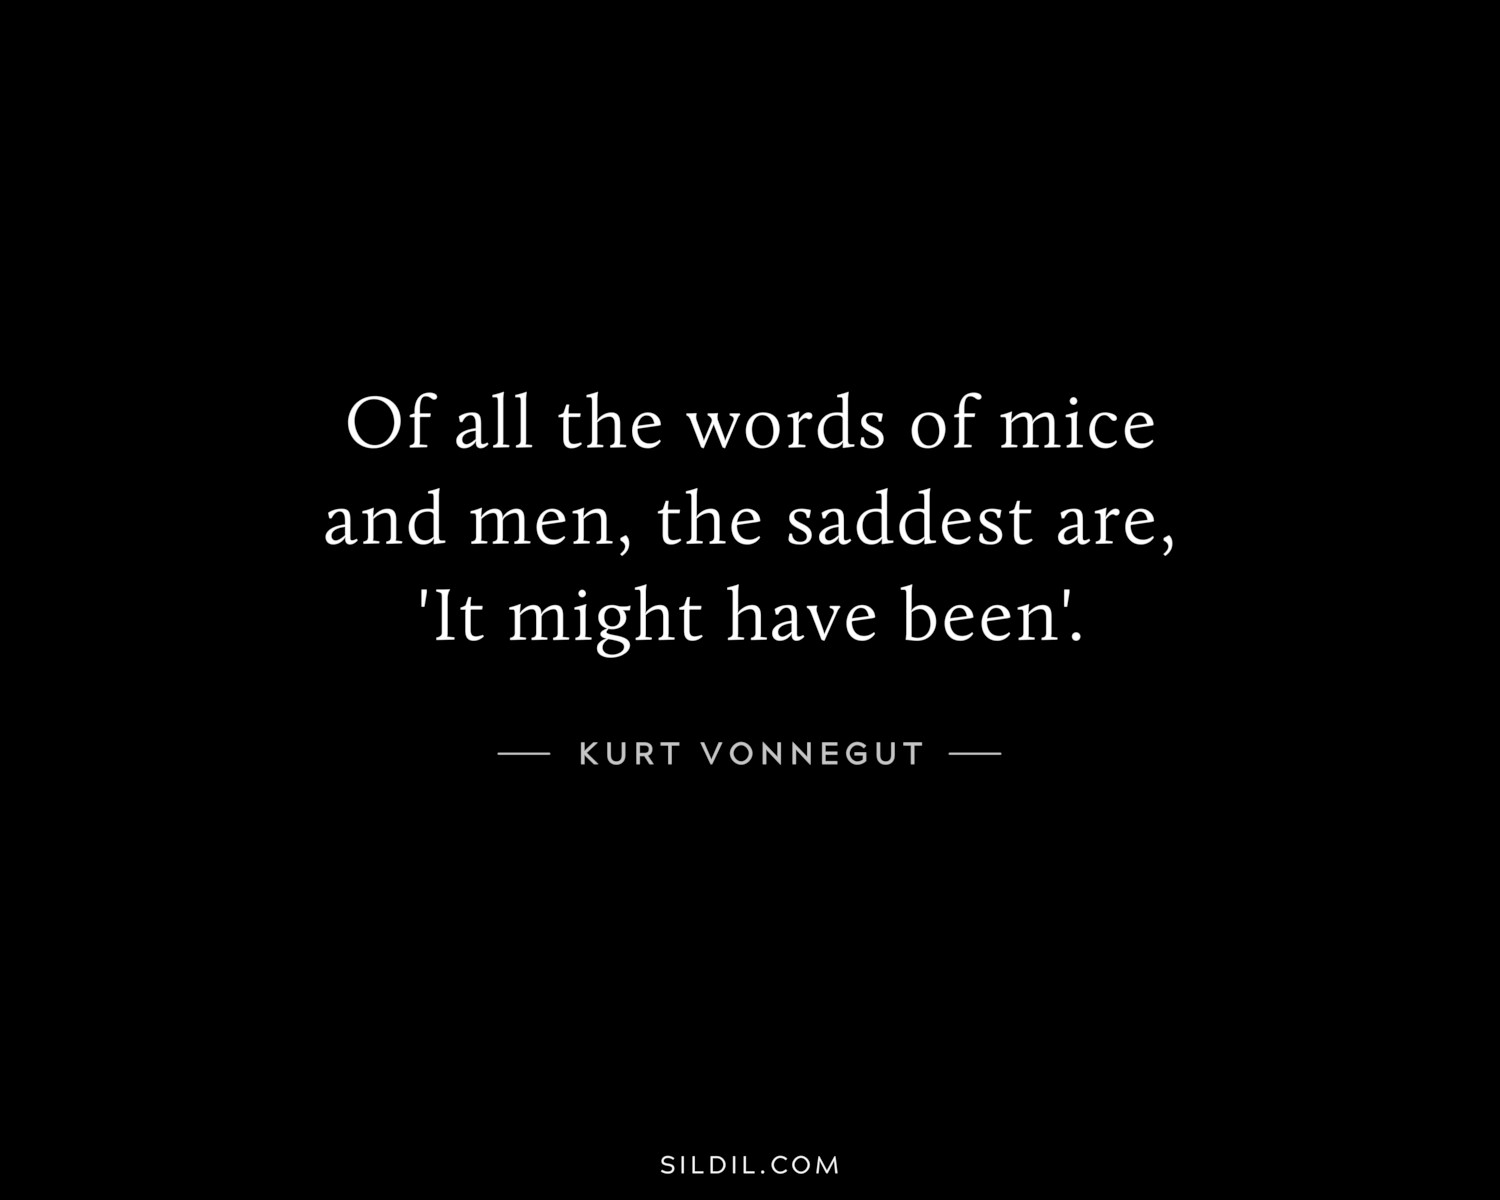 Of all the words of mice and men, the saddest are, 'It might have been'.